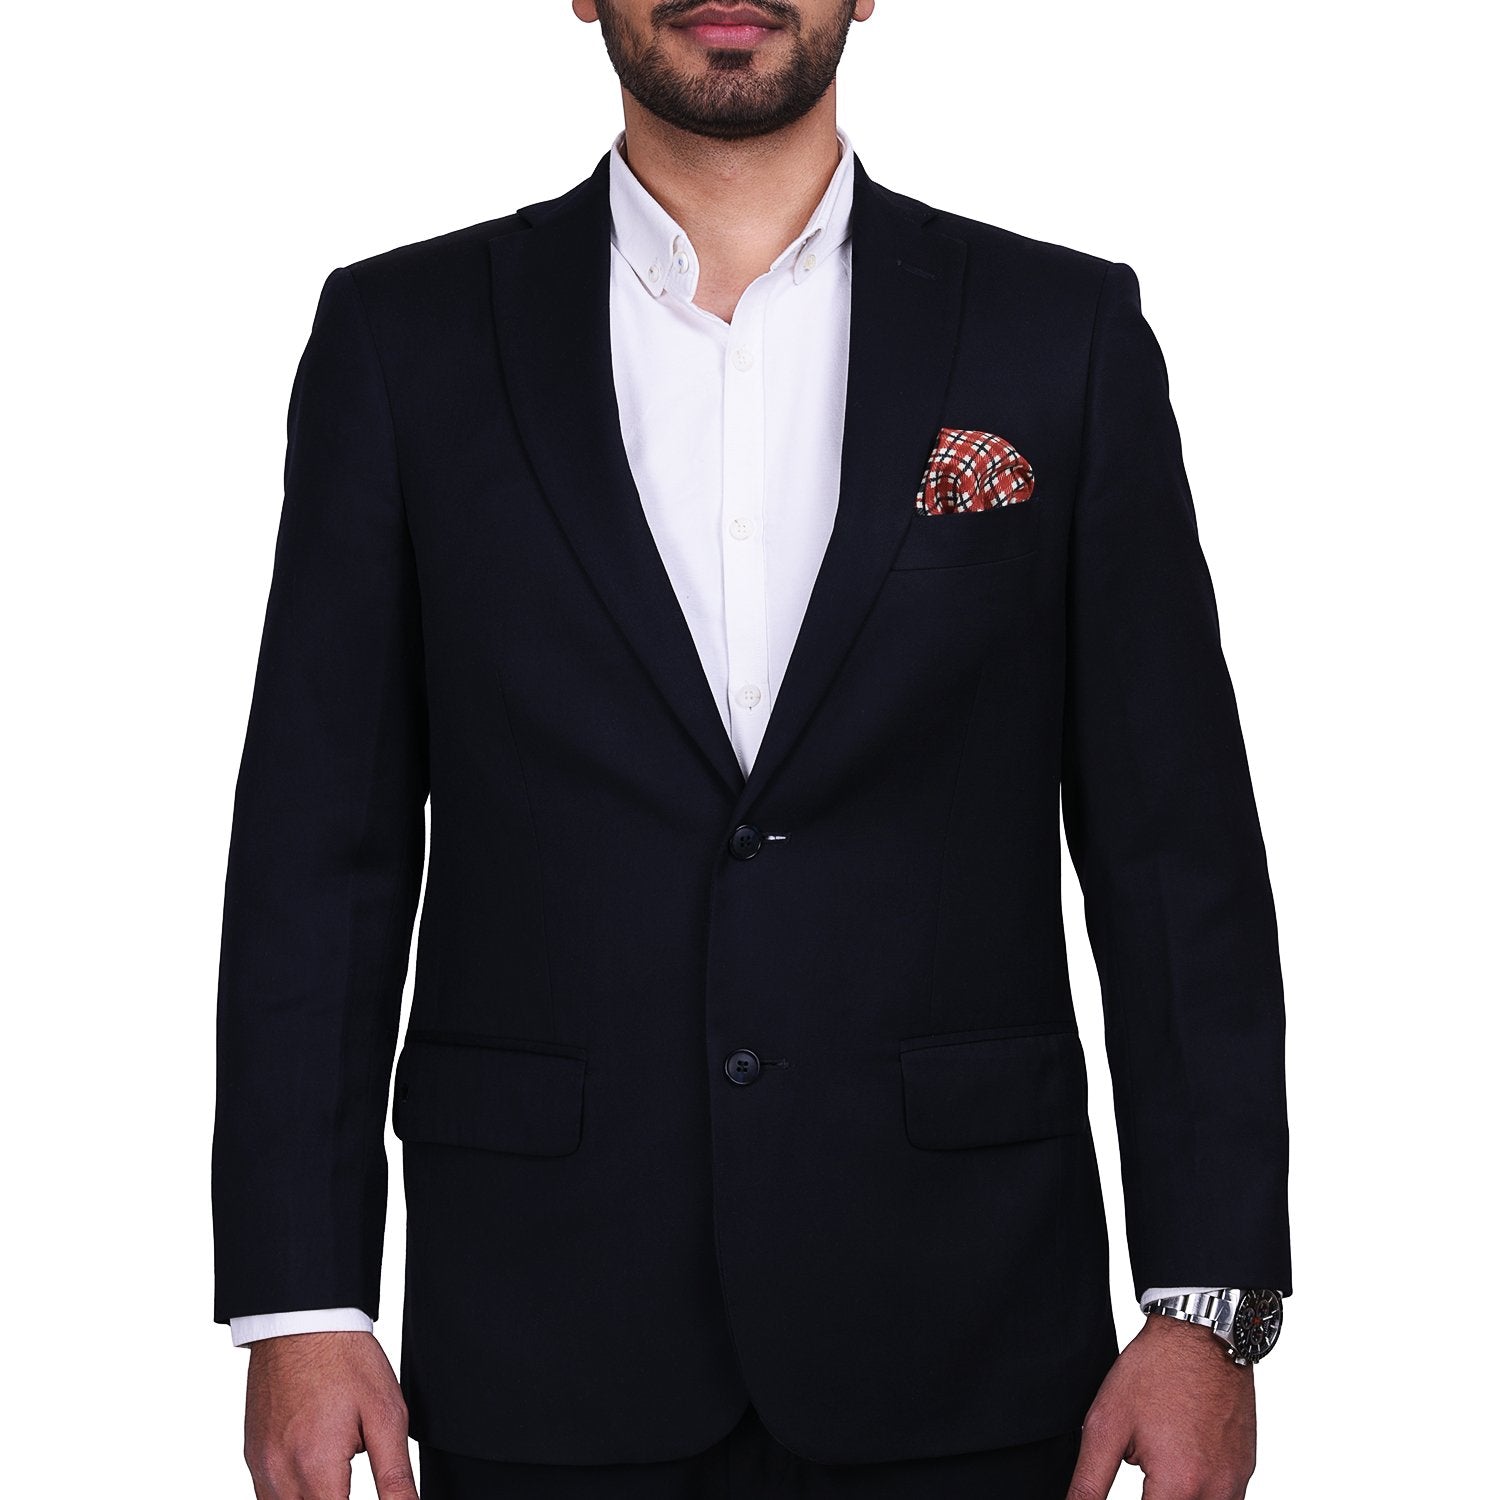 Chokore Pocket square in Two-in-One red and black from the Plaids line